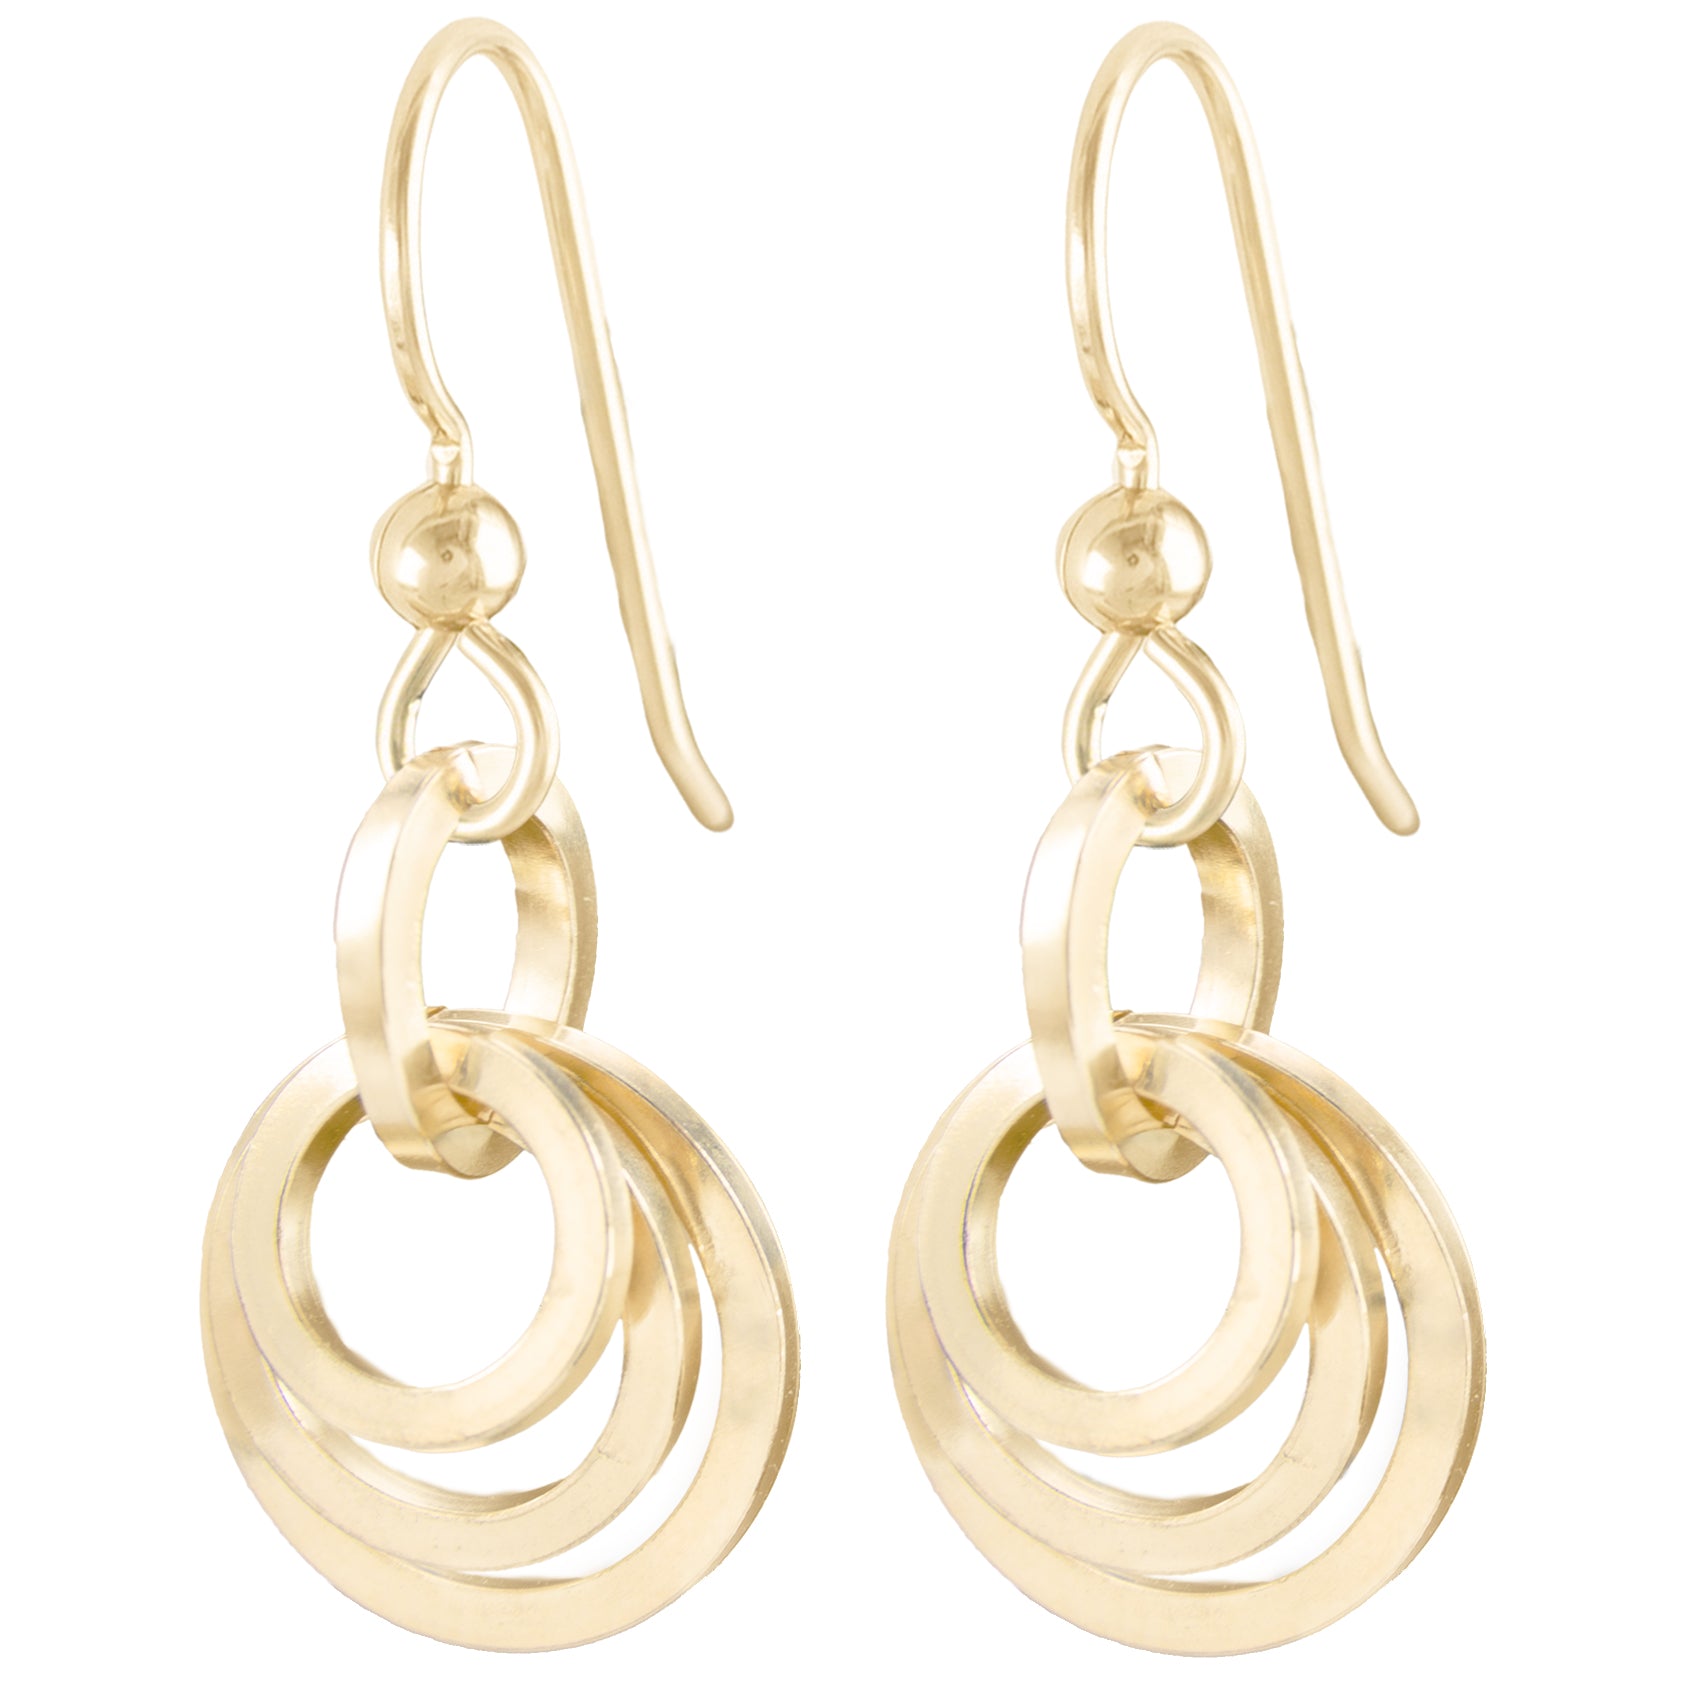 As Seen In The Lifetime Movie "Picture Perfect Holiday" - Concentric Circle Dangle Earrings in 14K Yellow Gold Fill